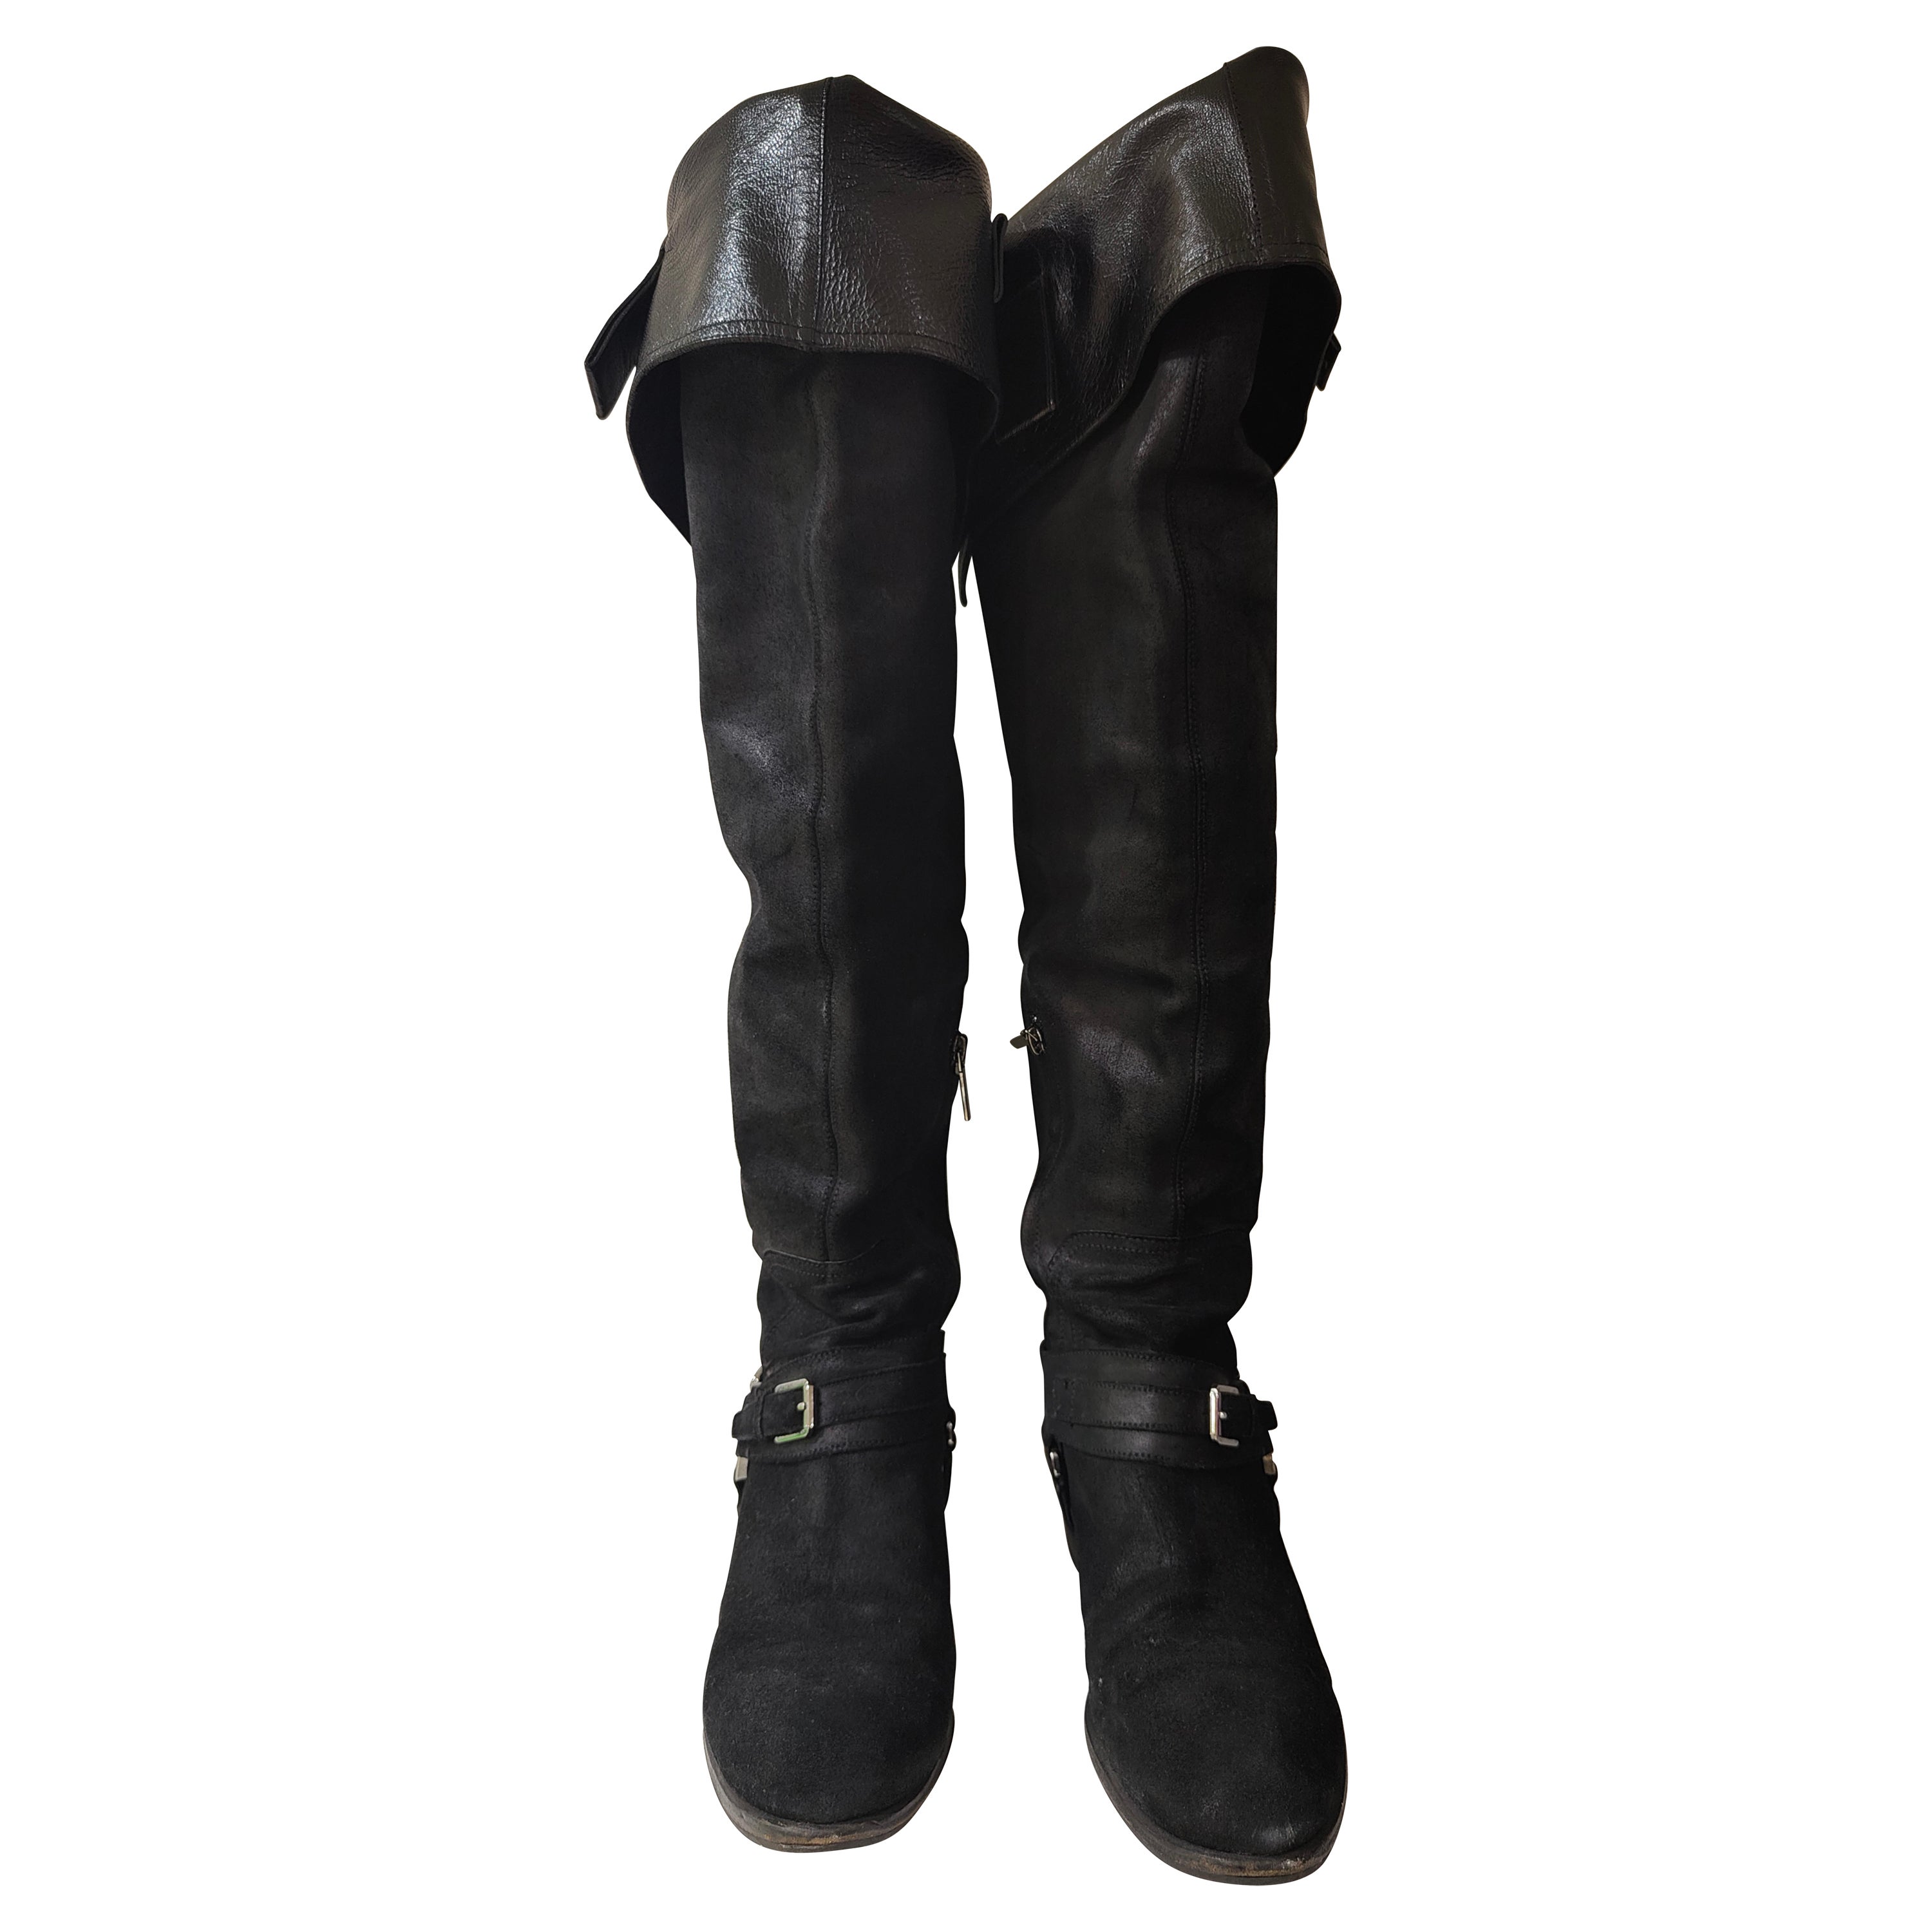 Christian Dior black suede boots